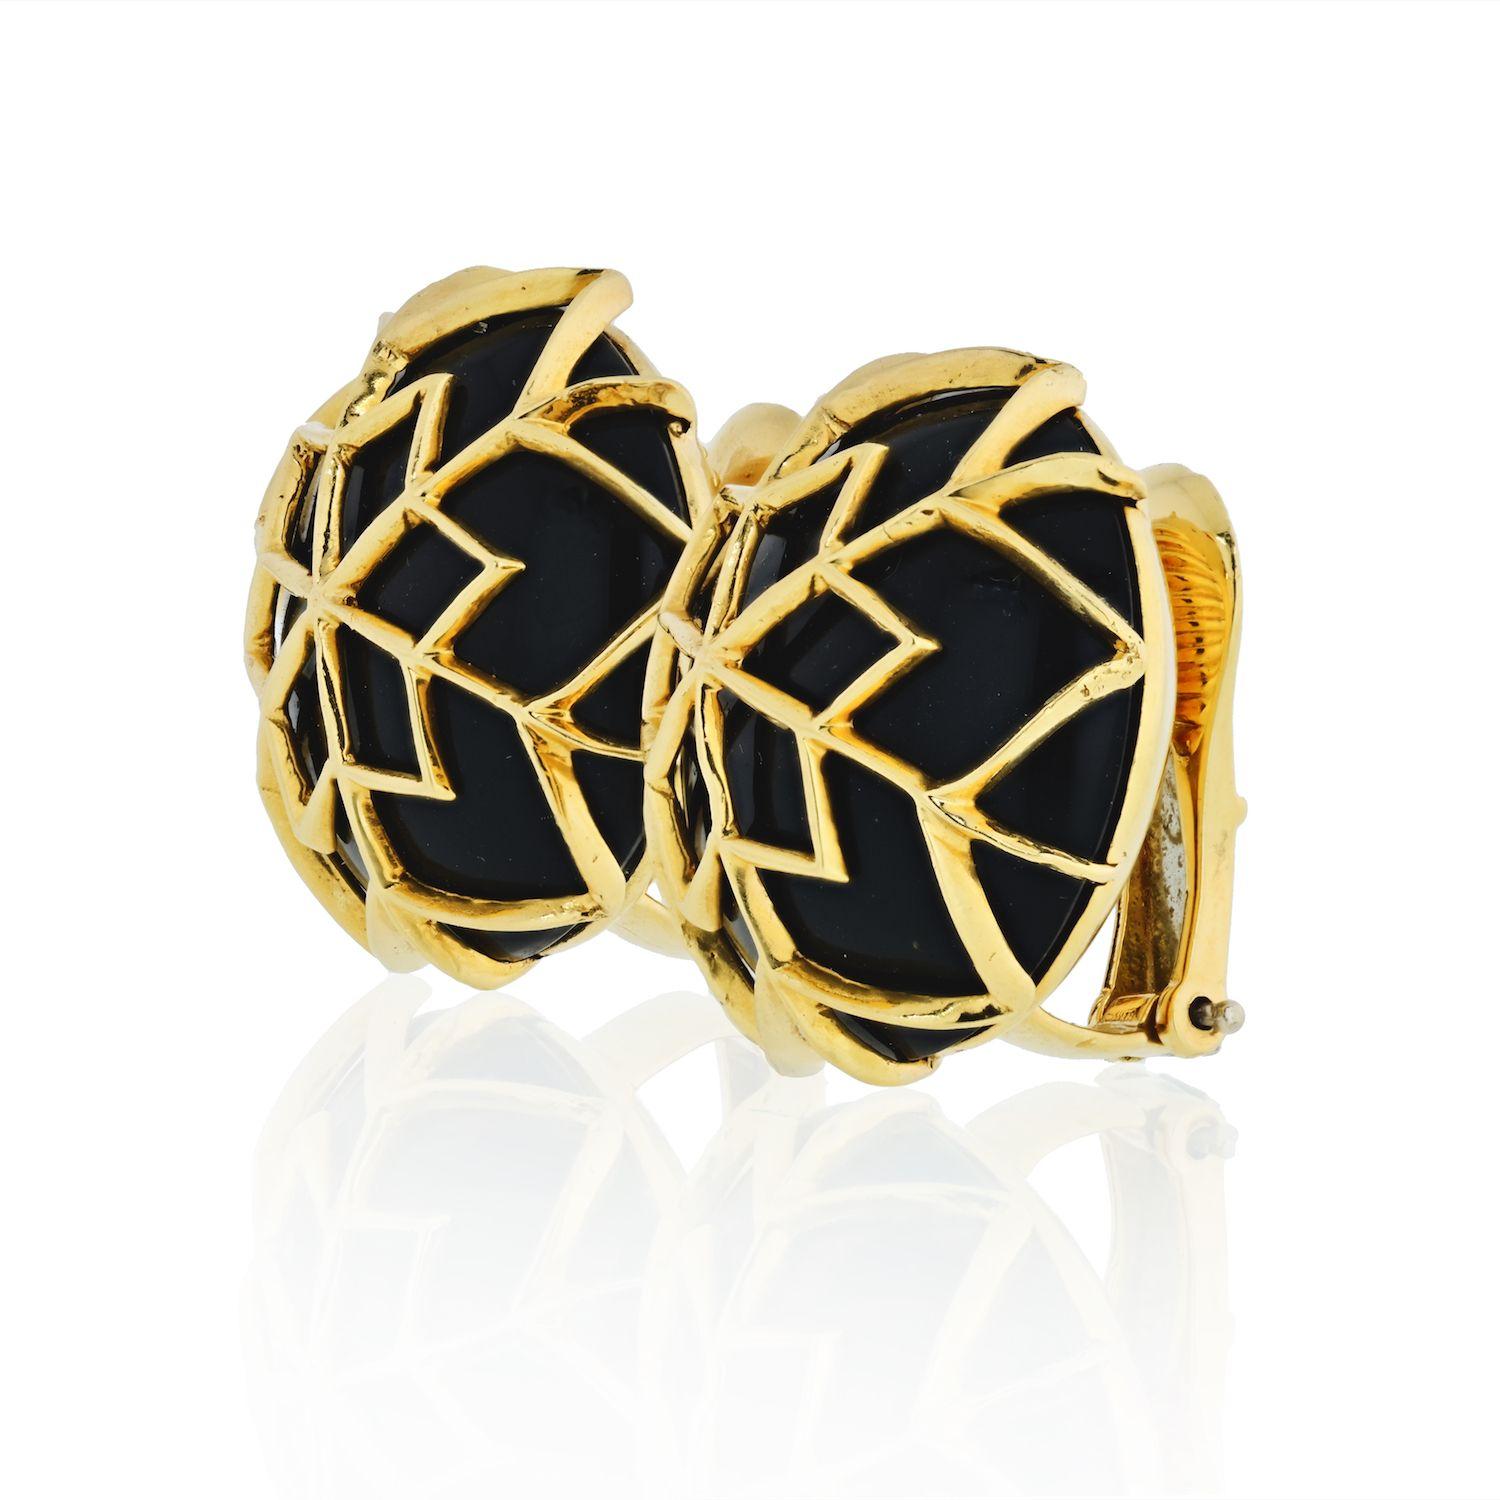 These exquisite estate David Webb clip-on earrings boast a captivating design featuring round onyx cabochons with delicate overlays, all meticulously mounted in lustrous 18k yellow gold. The signature 